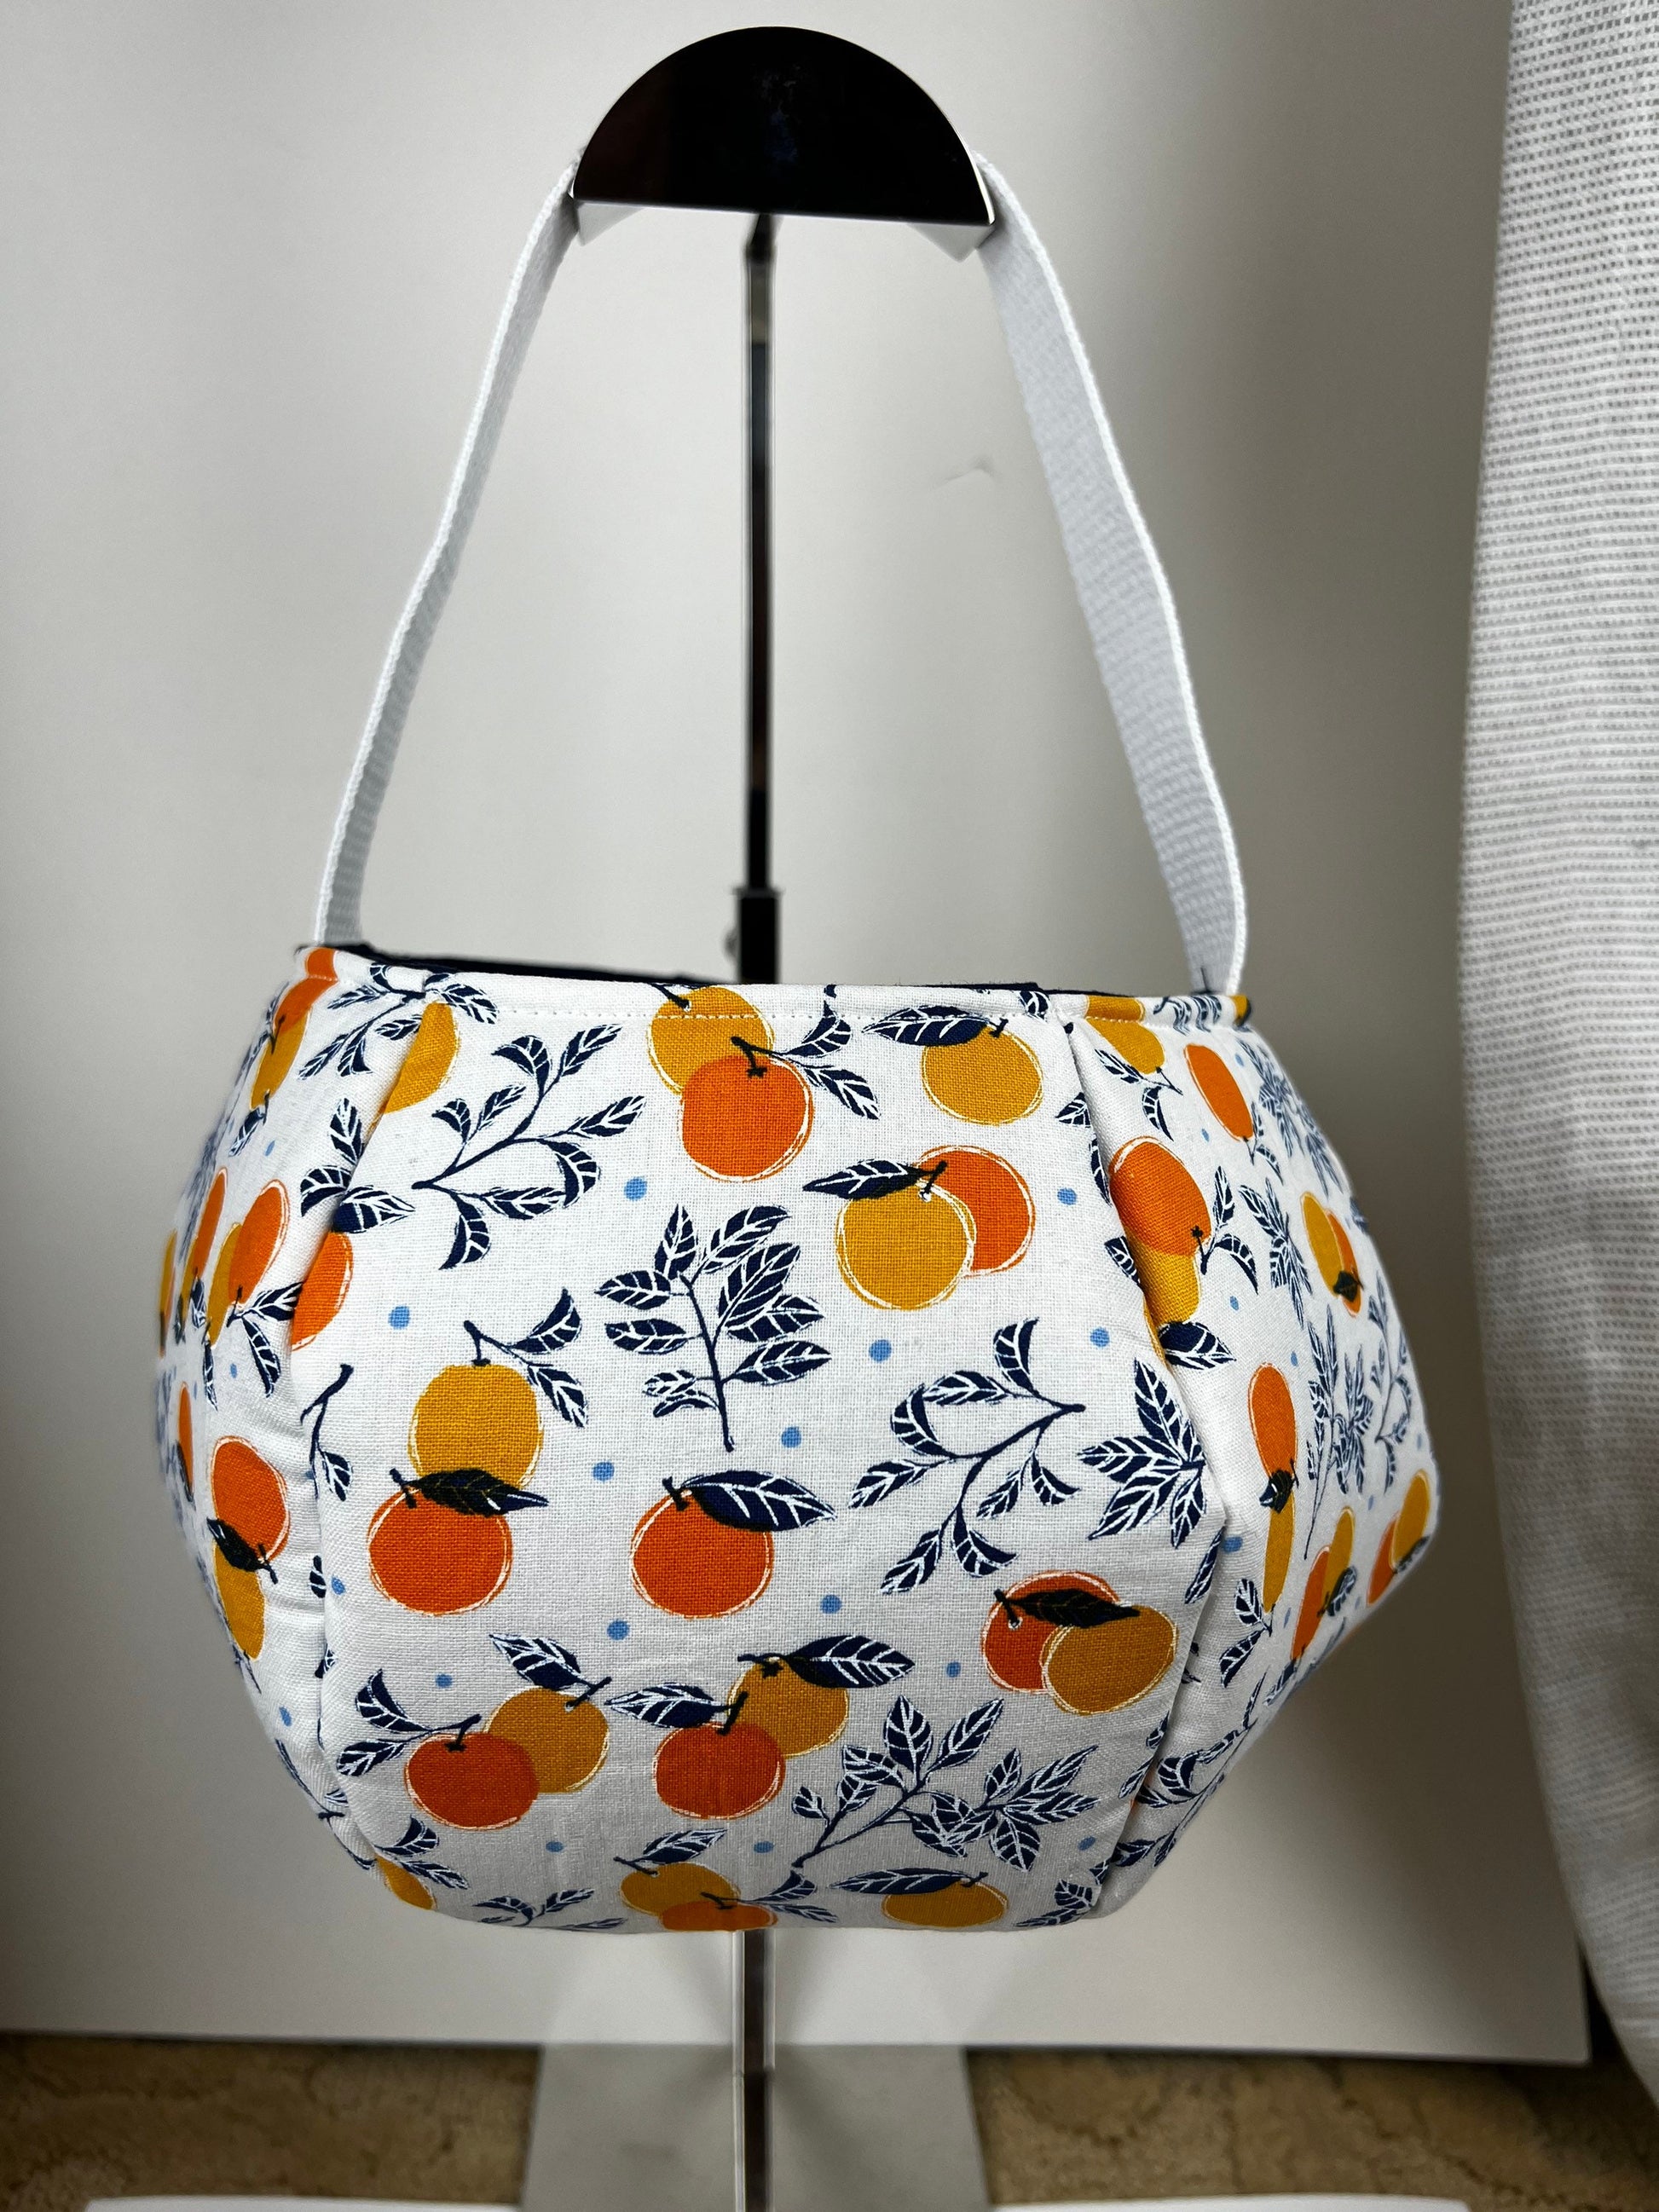 Citrus Tote Bag - Bag - Tote - Orange - White - Citrus - Multi-Colored - Everyday - Holiday - Easter - Halloween - Party - Gift